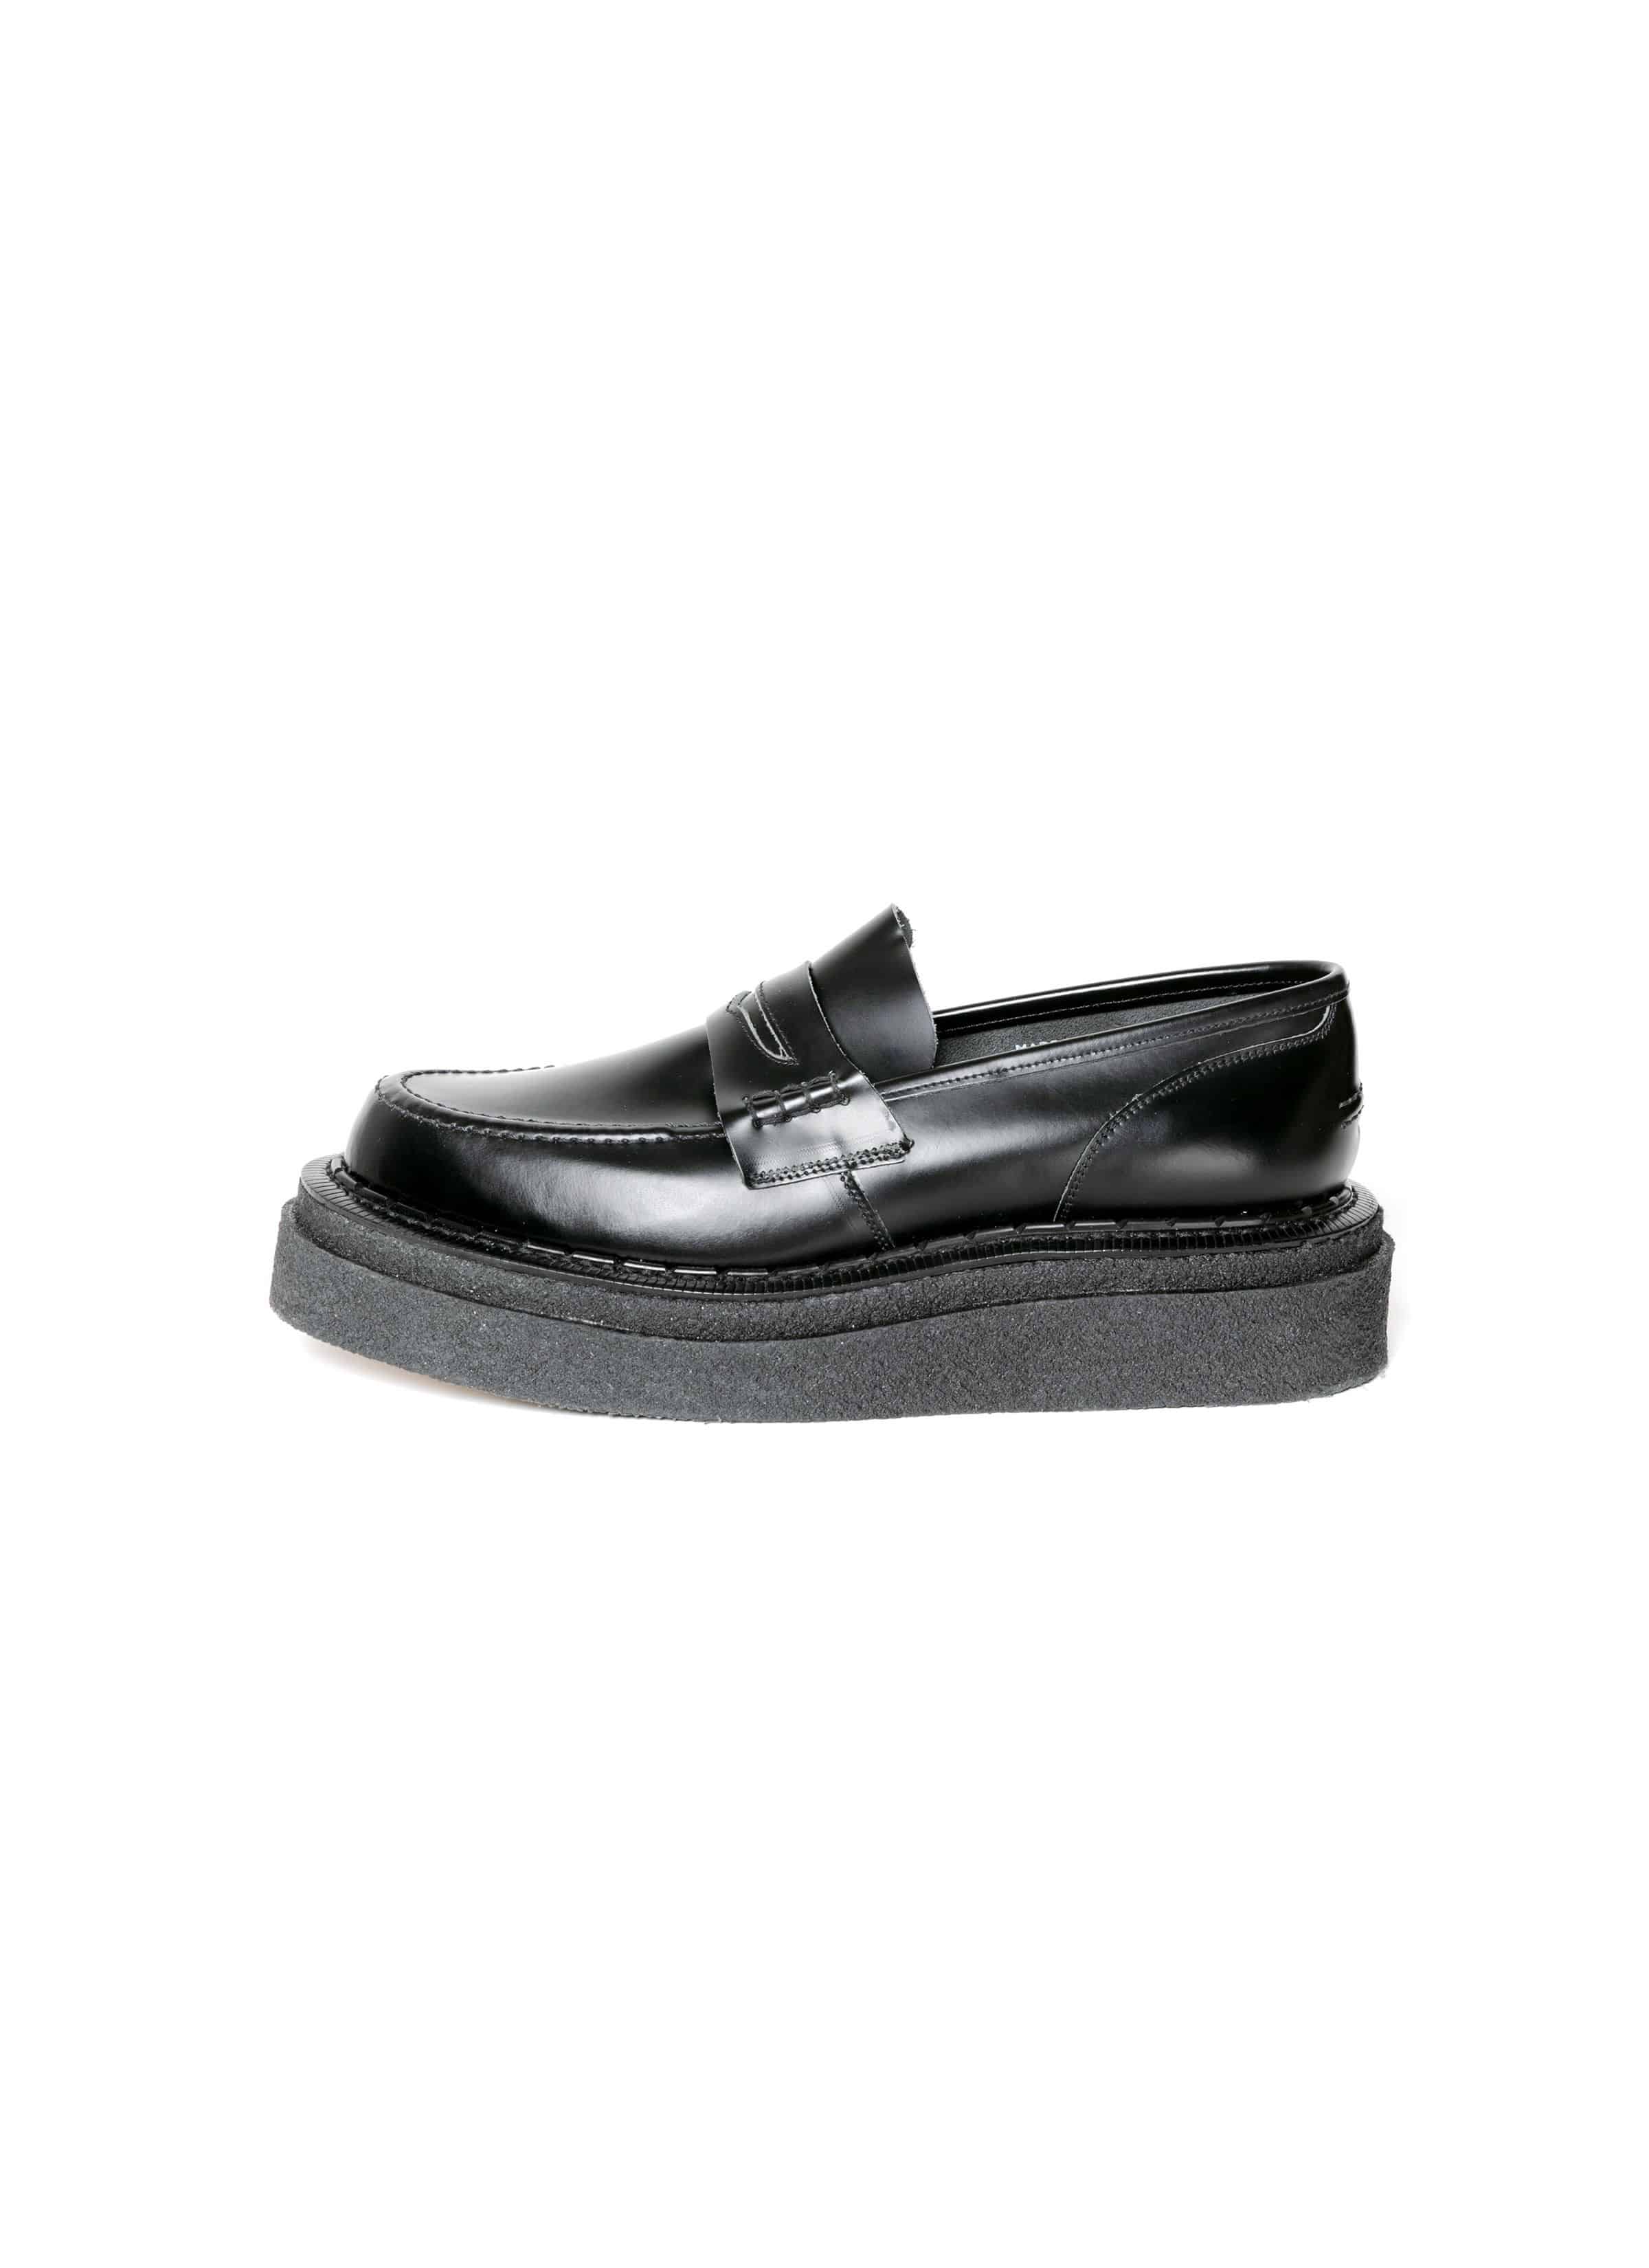 sacai x George Cox / Double Sole Coin Loafer 詳細画像 BLACK 1